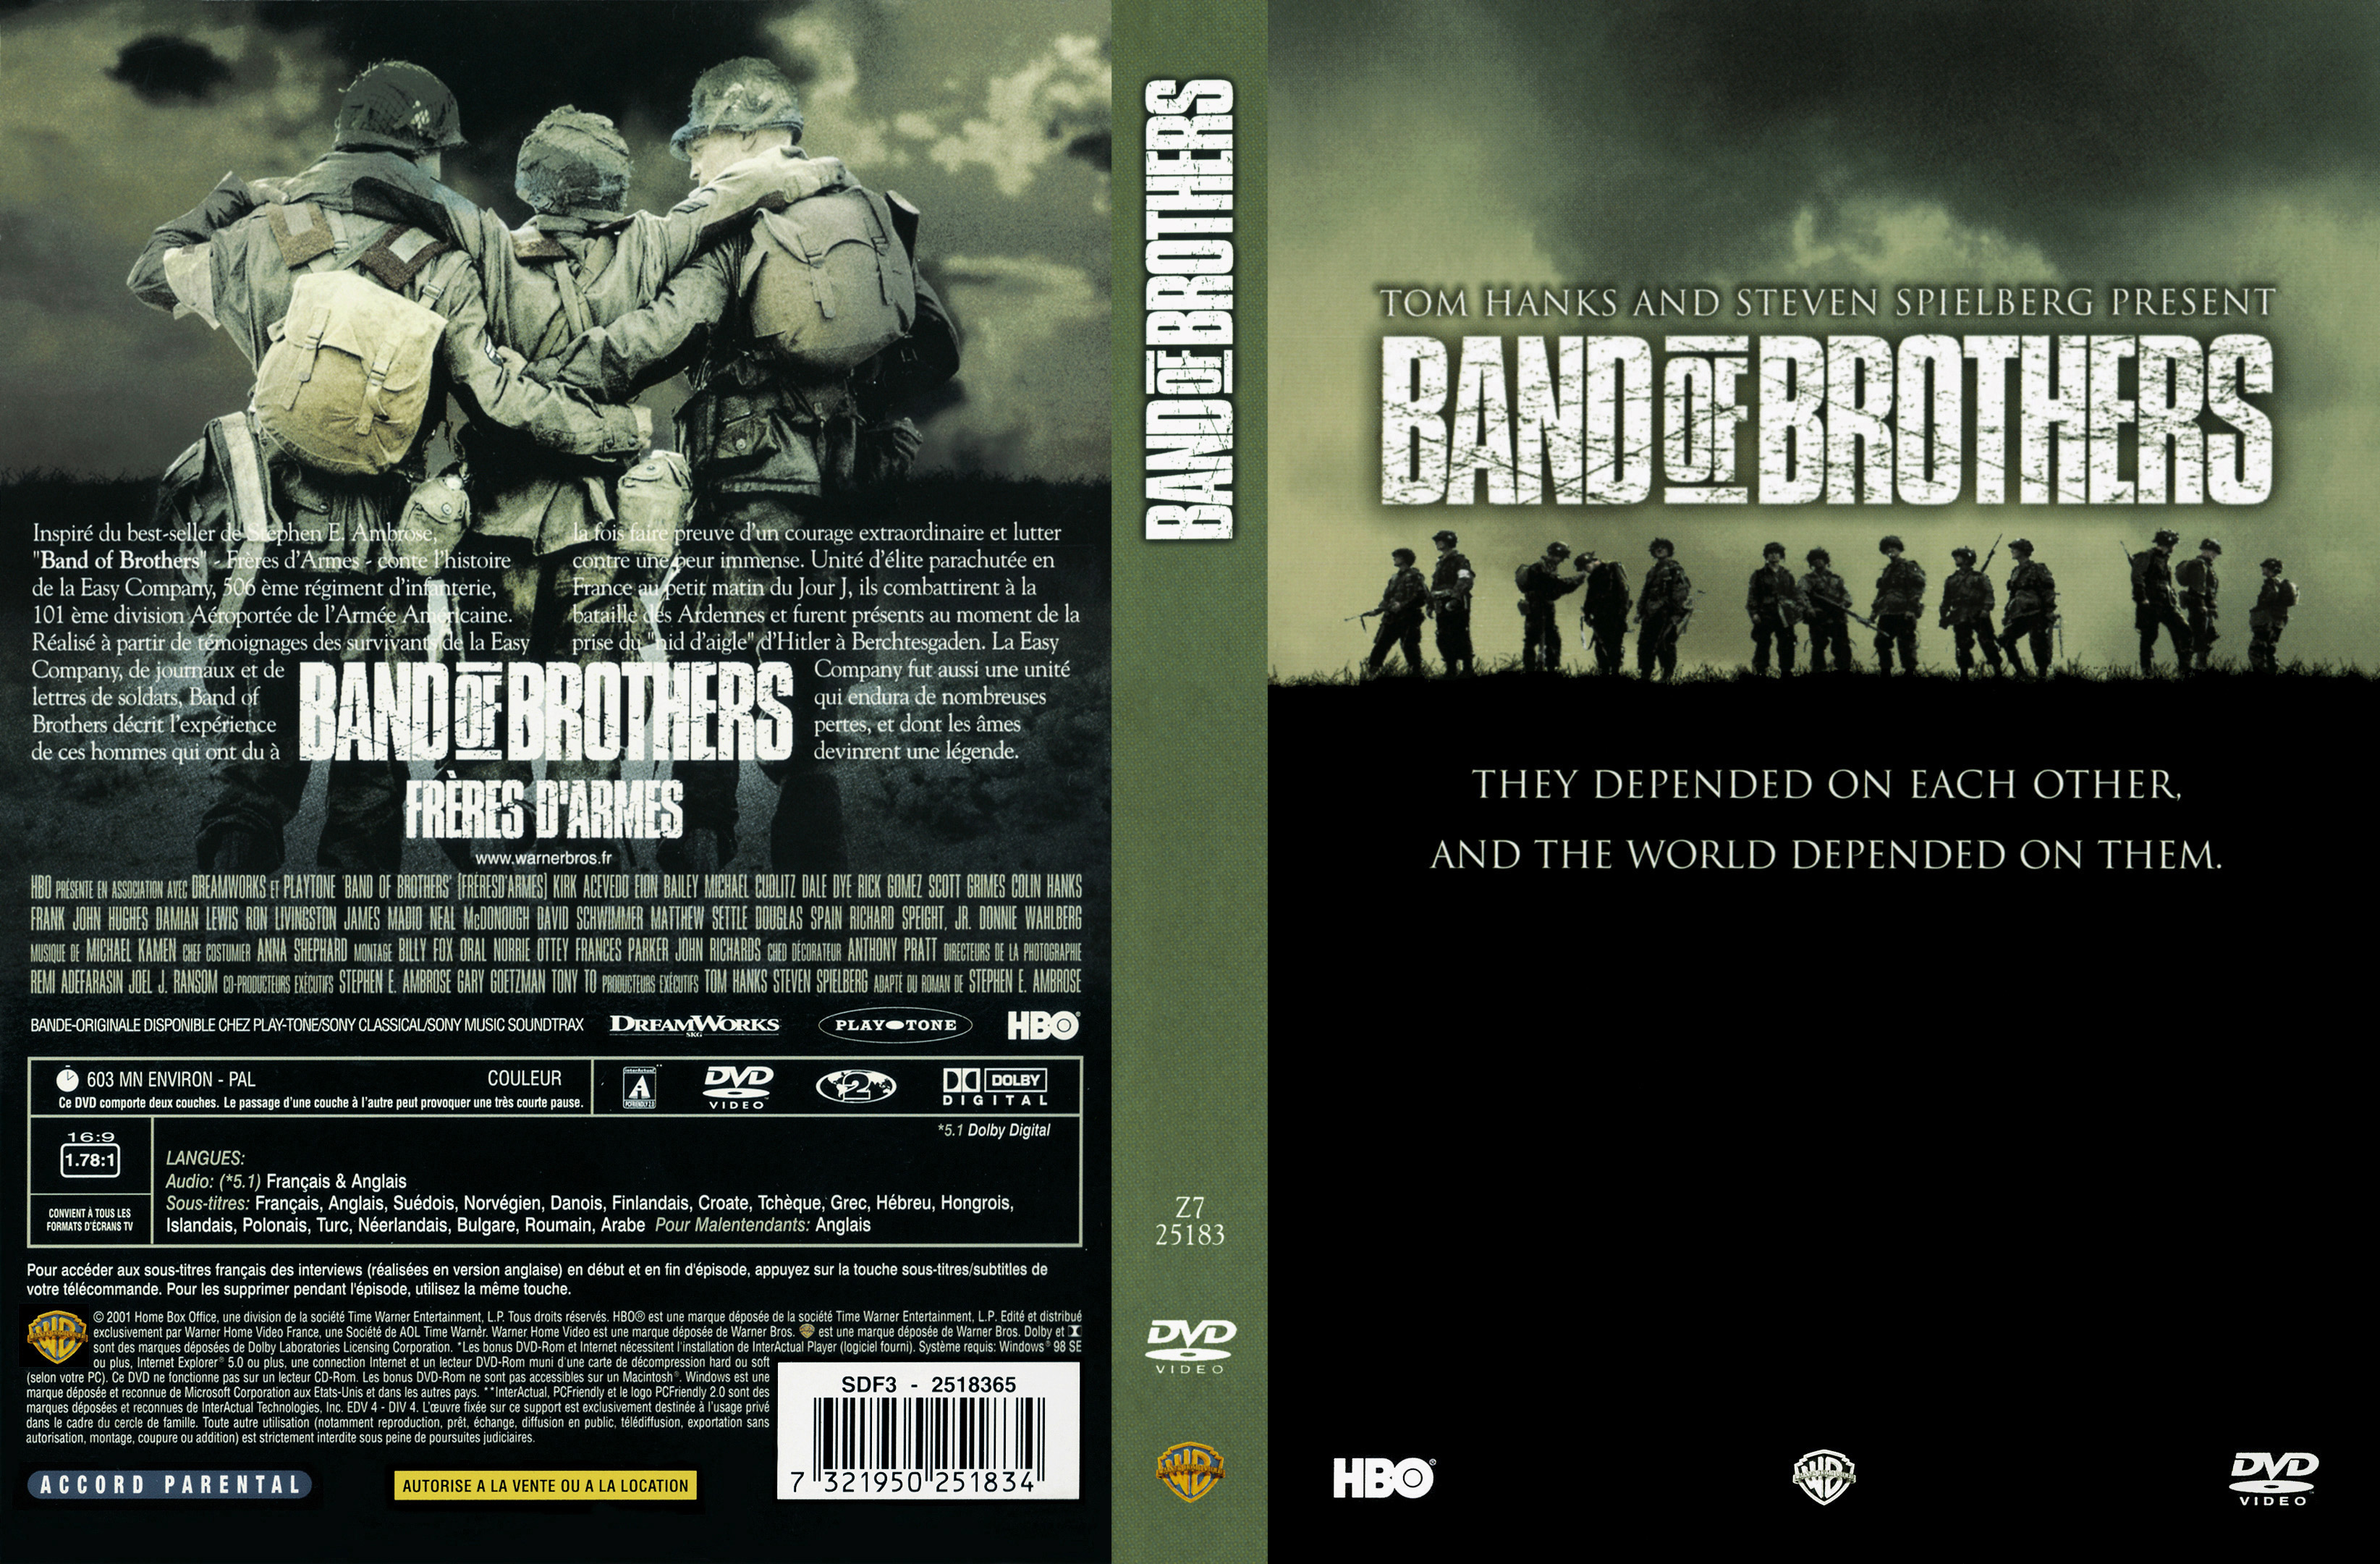 Jaquette DVD Band of Brothers